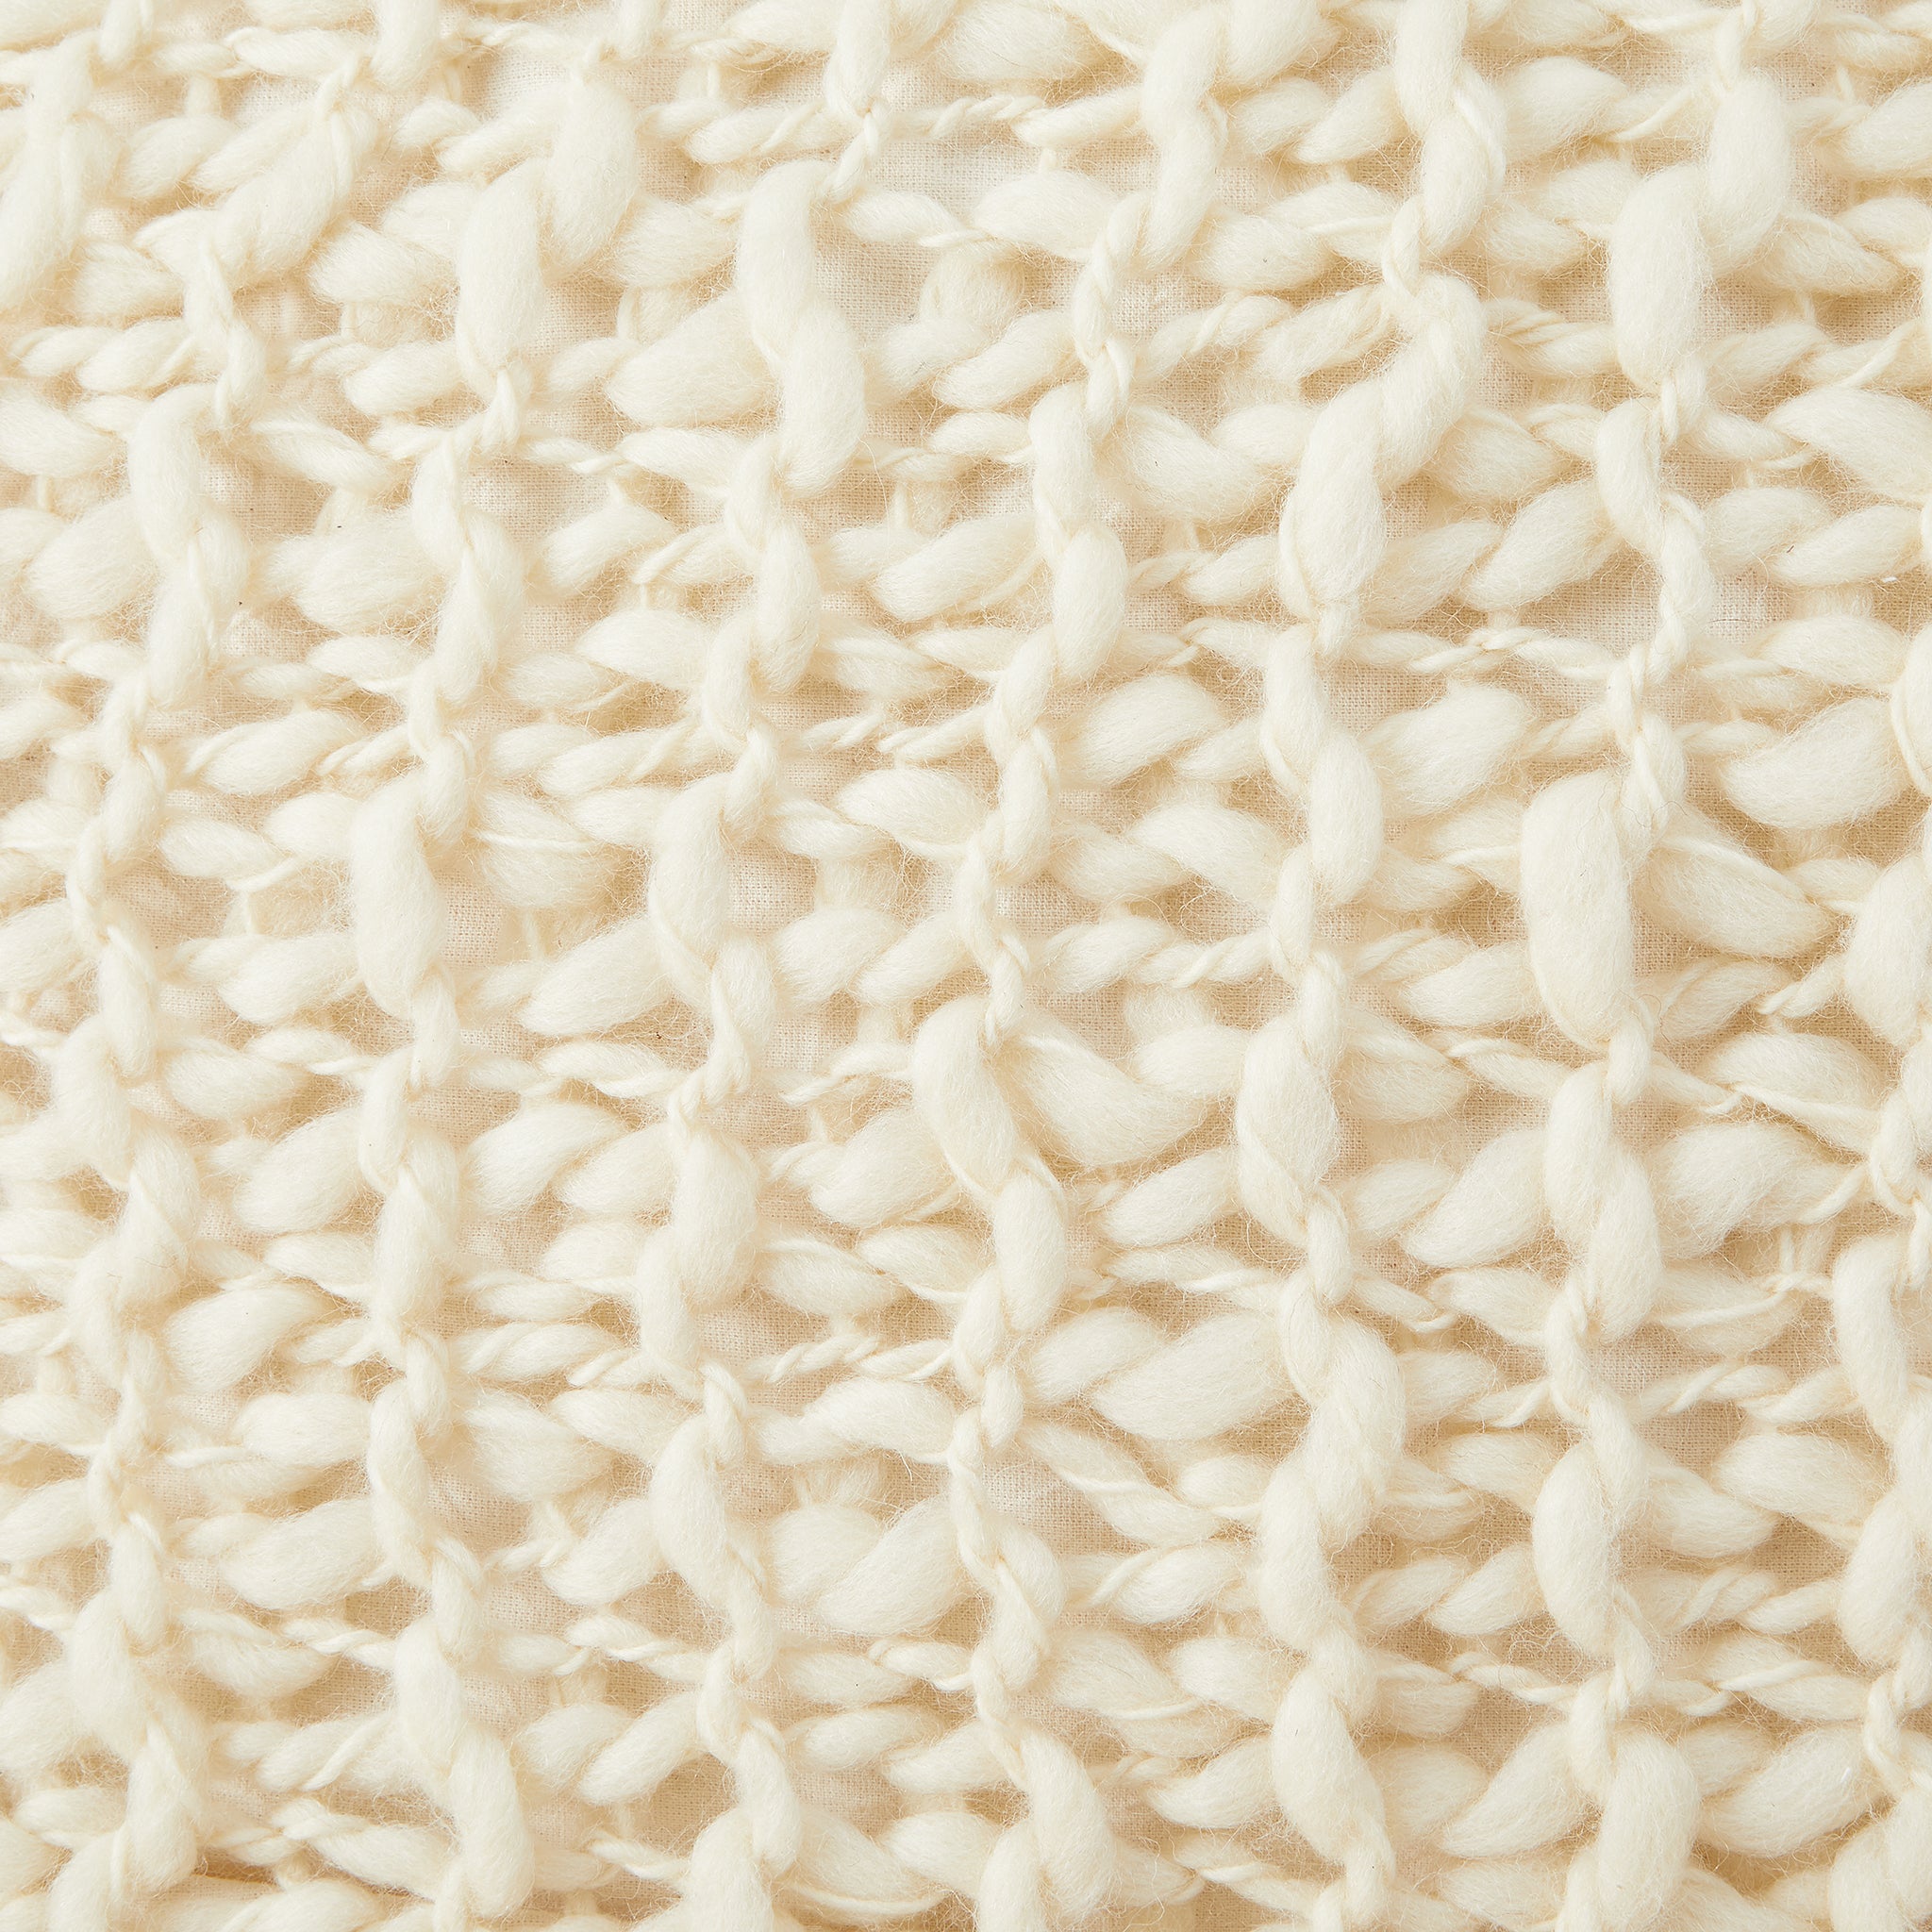 BY NATIVE Cushion Animana Detail, hand-woven from 100% merino wool, natural white